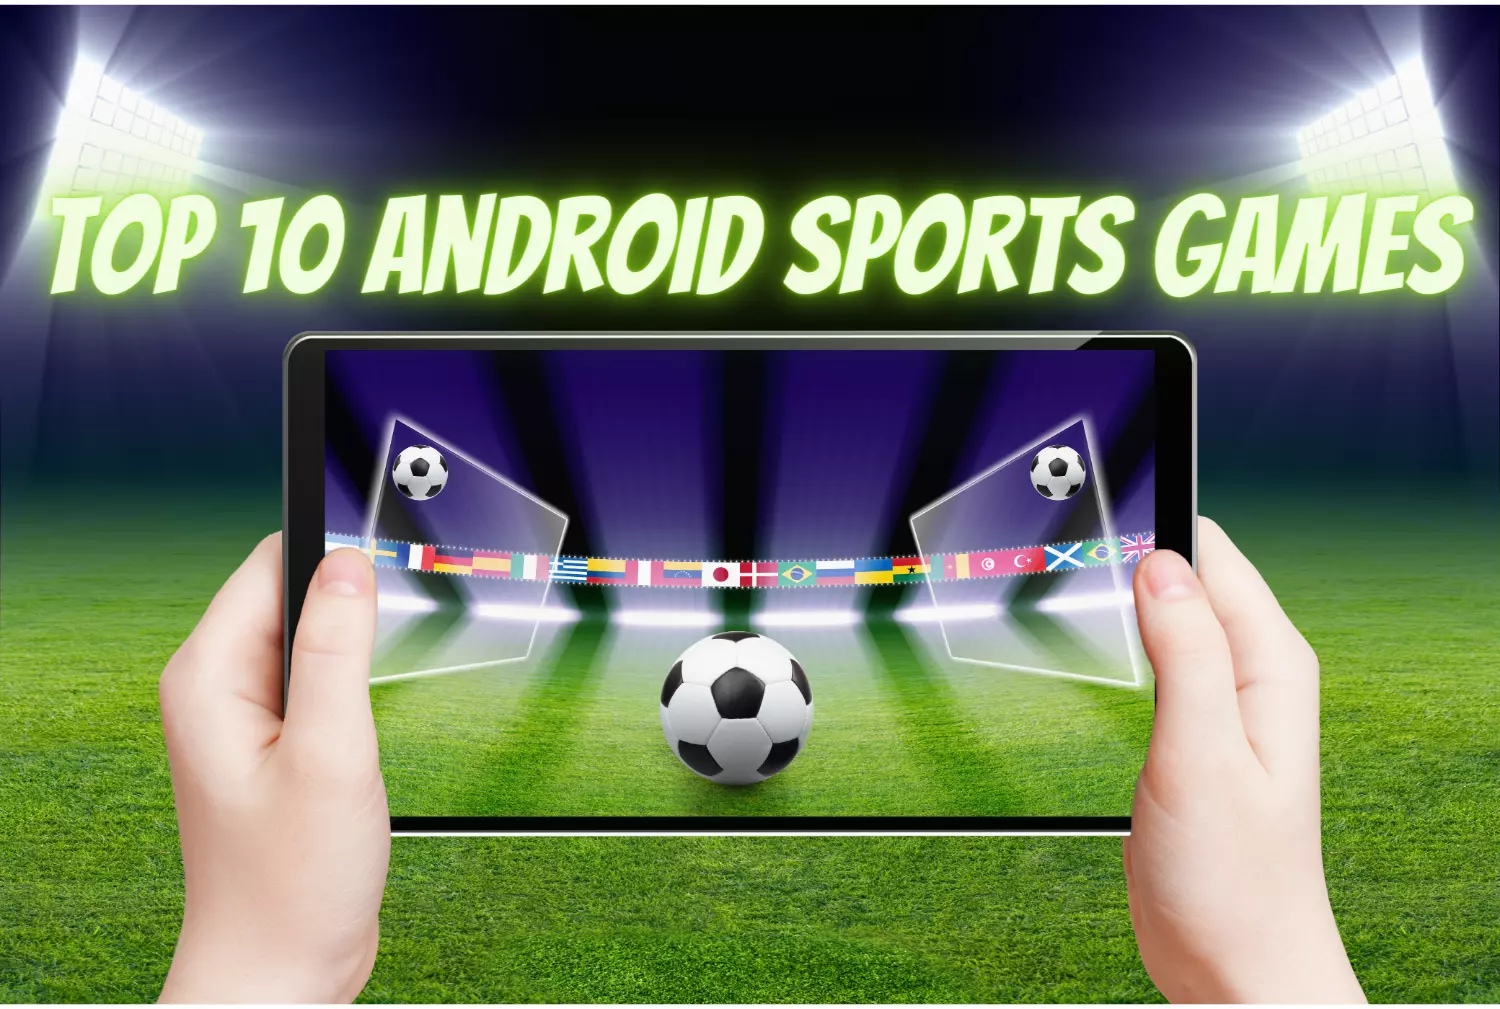 Top 10 Android Sports Games